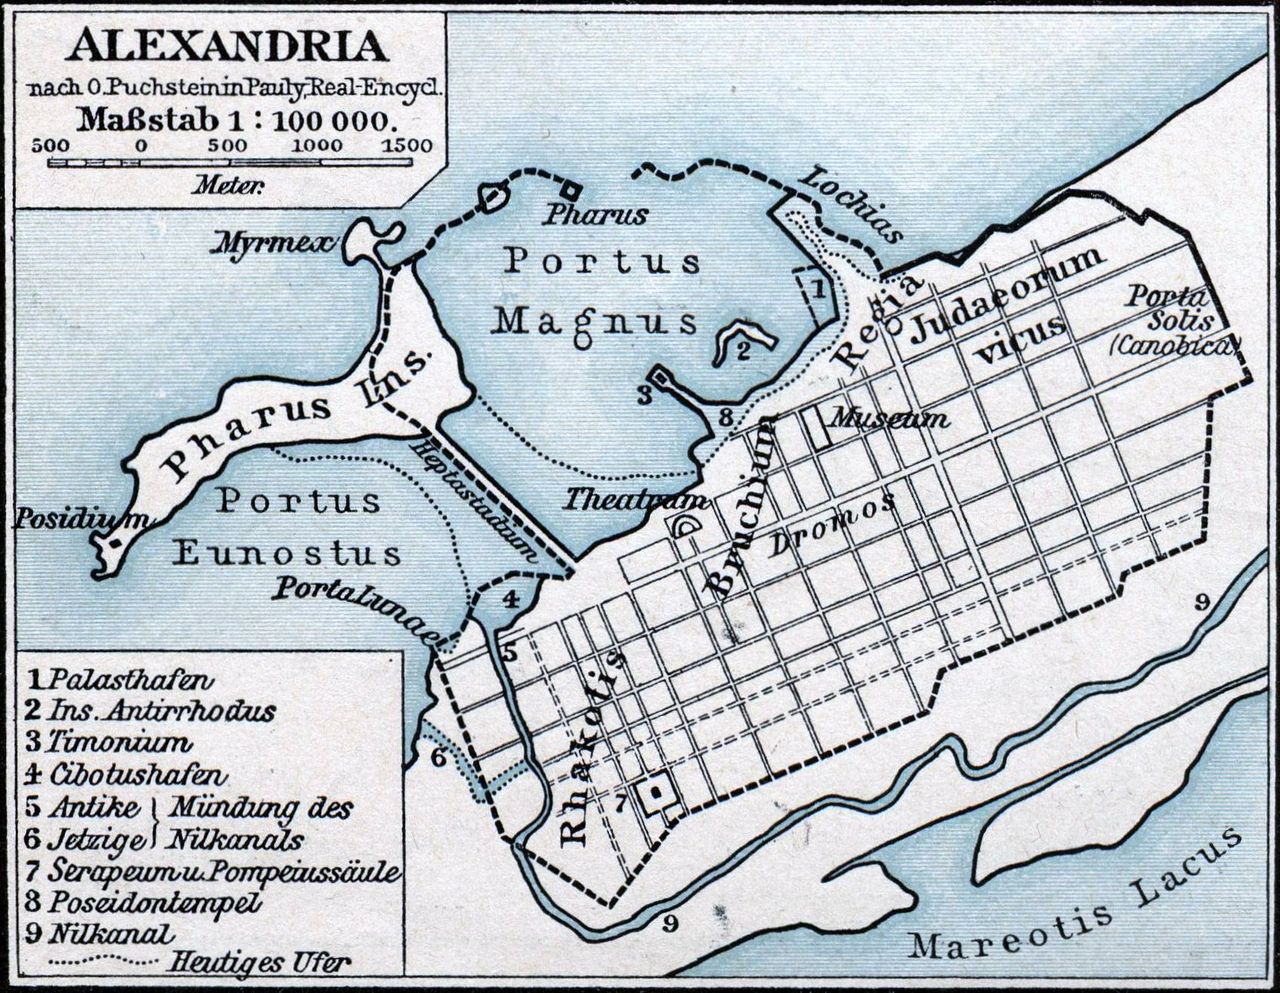 Map of ancient Alexandria. The Mouseion was located in the royal Broucheion quarter (listed on this map as Bruchium) in the central part of the city near the Great Harbor (Portus Magnus on the map)